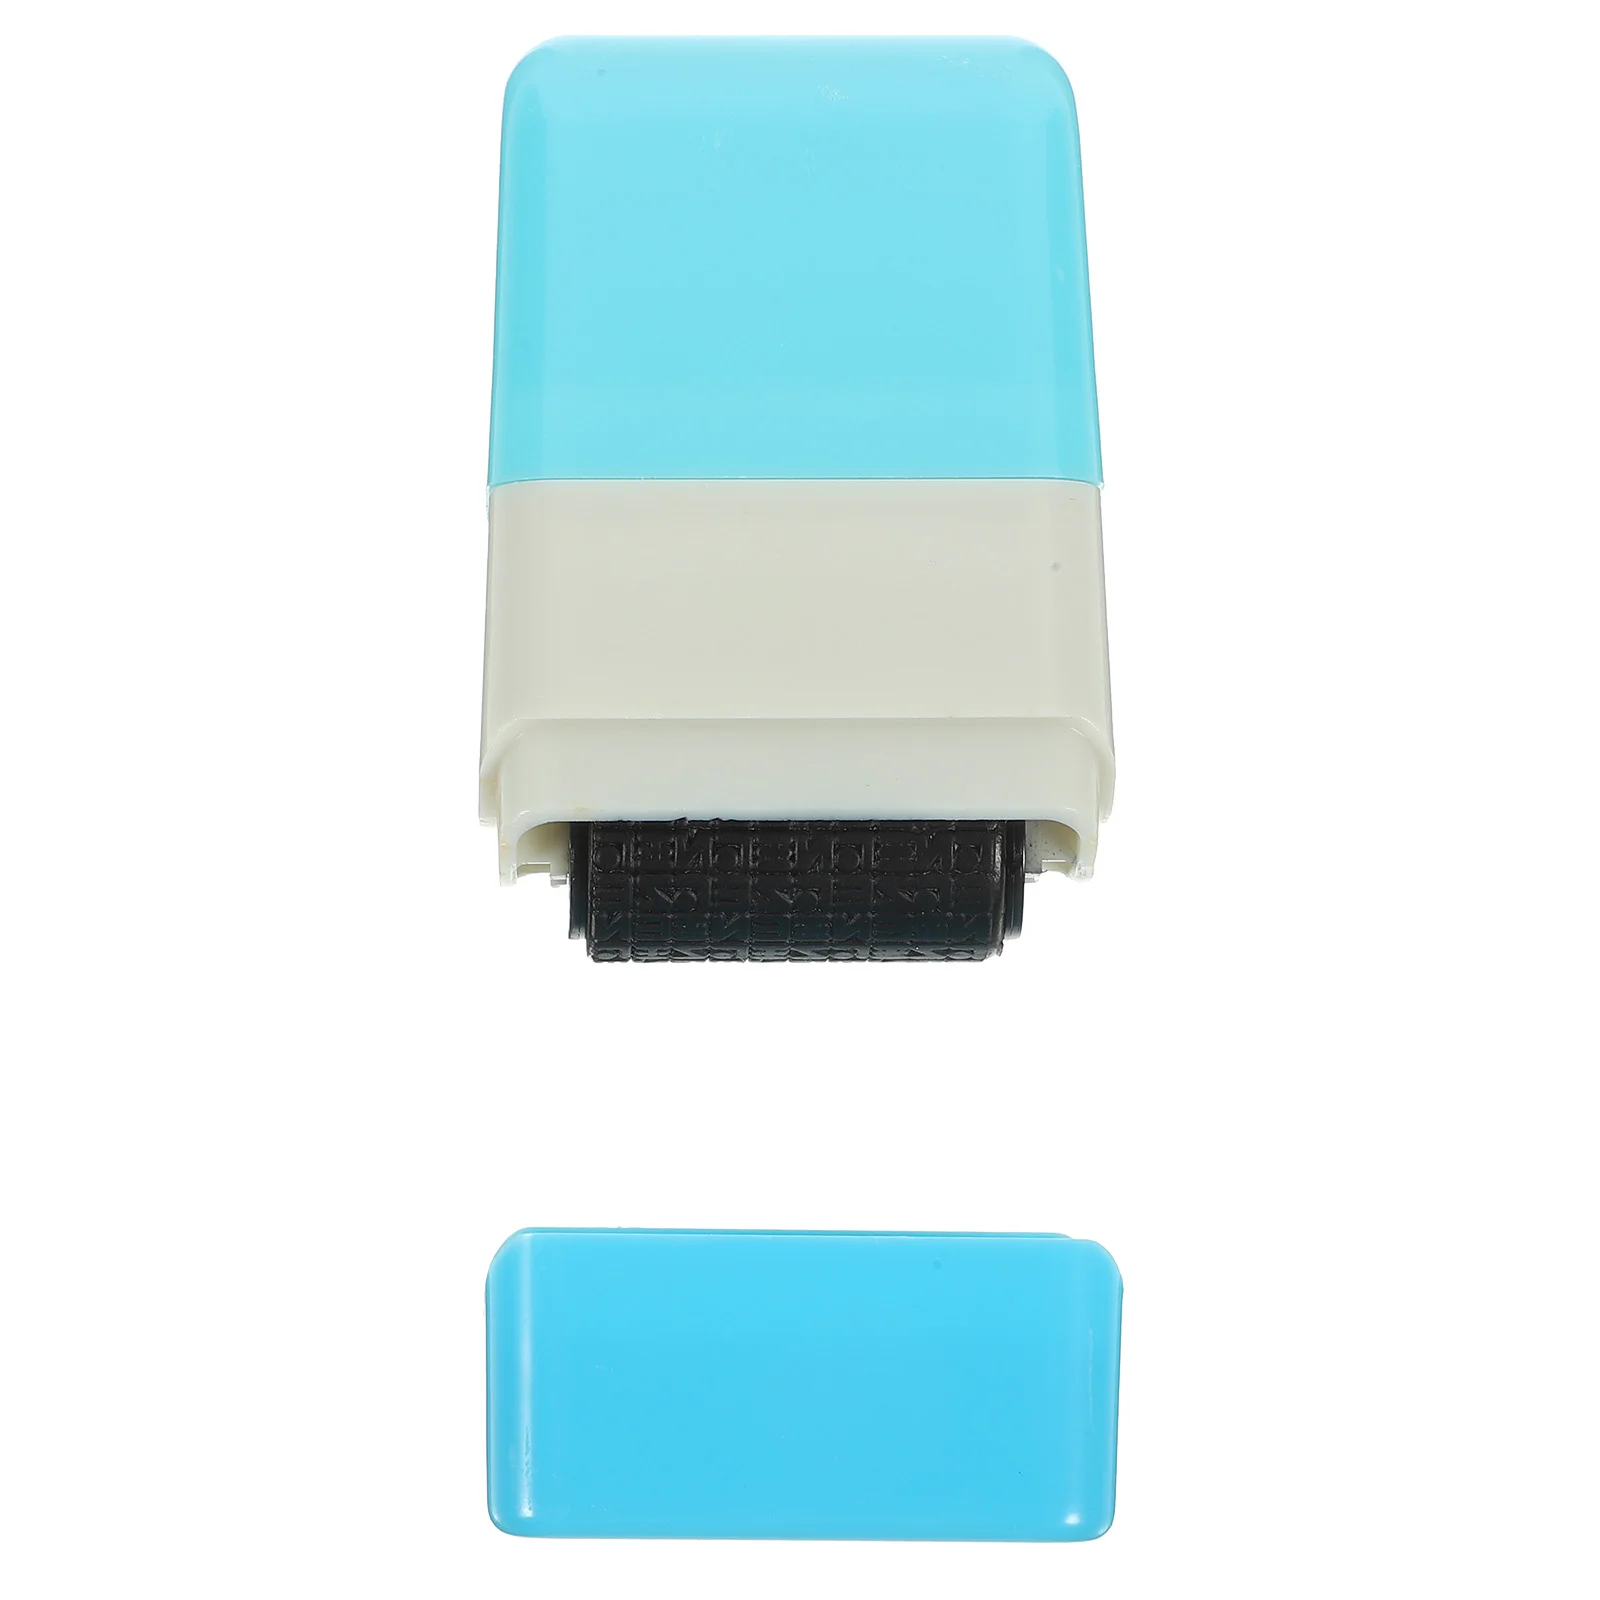 

Privacy Smear Seal Roller Tool Multifunction Portable Stamp Plastic Household Confidential